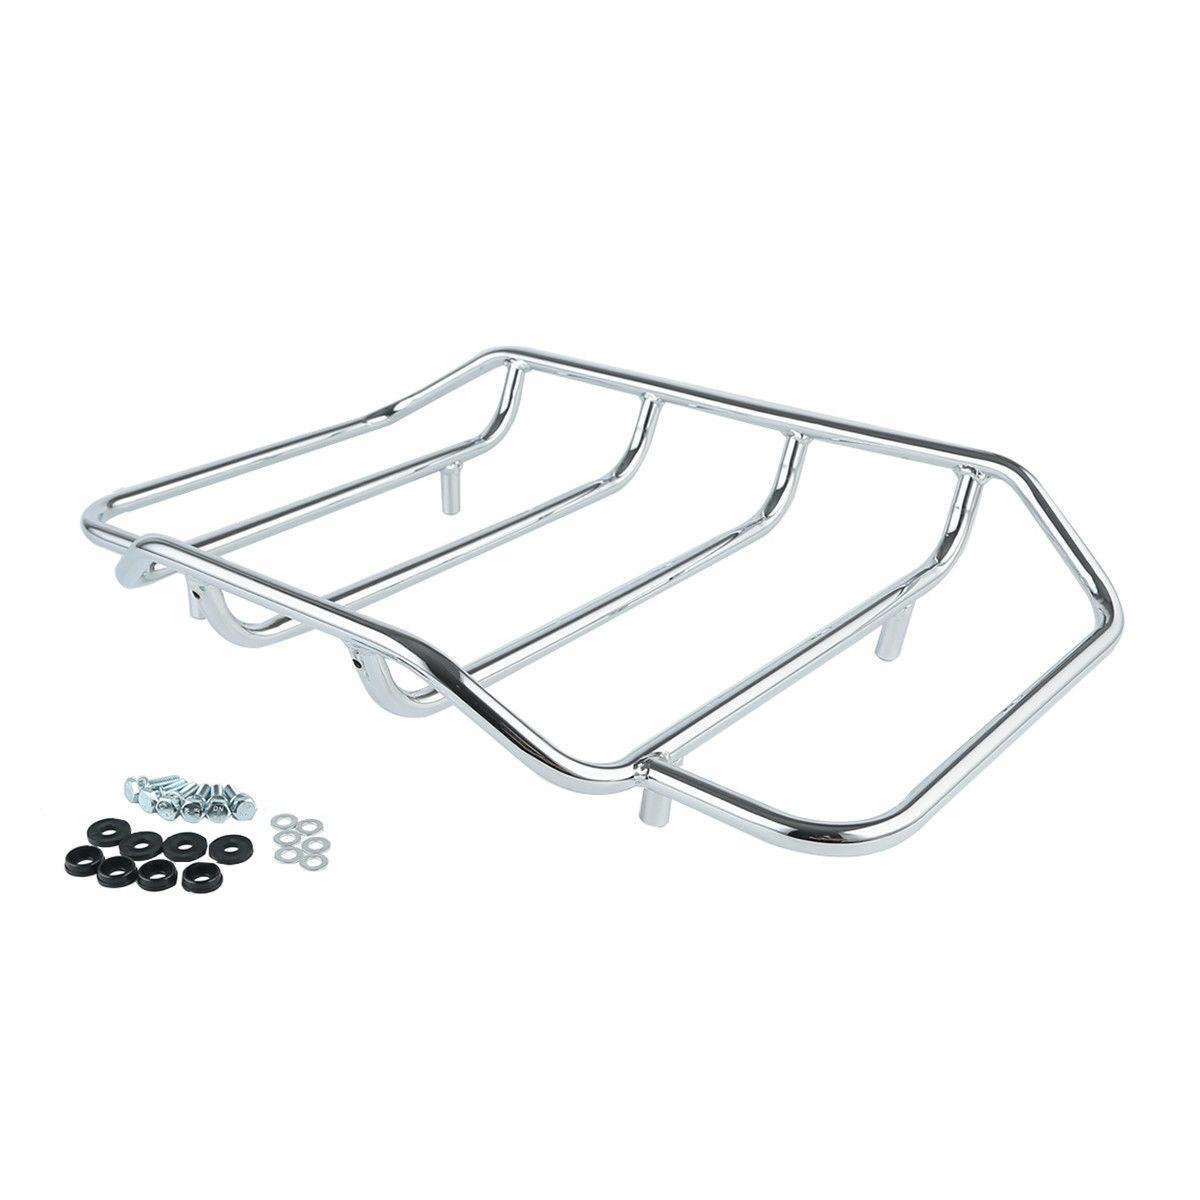 Chrome Luggage Rack Fit For HarleyTour Pak Street Electra Tri Glide Road King - Moto Life Products